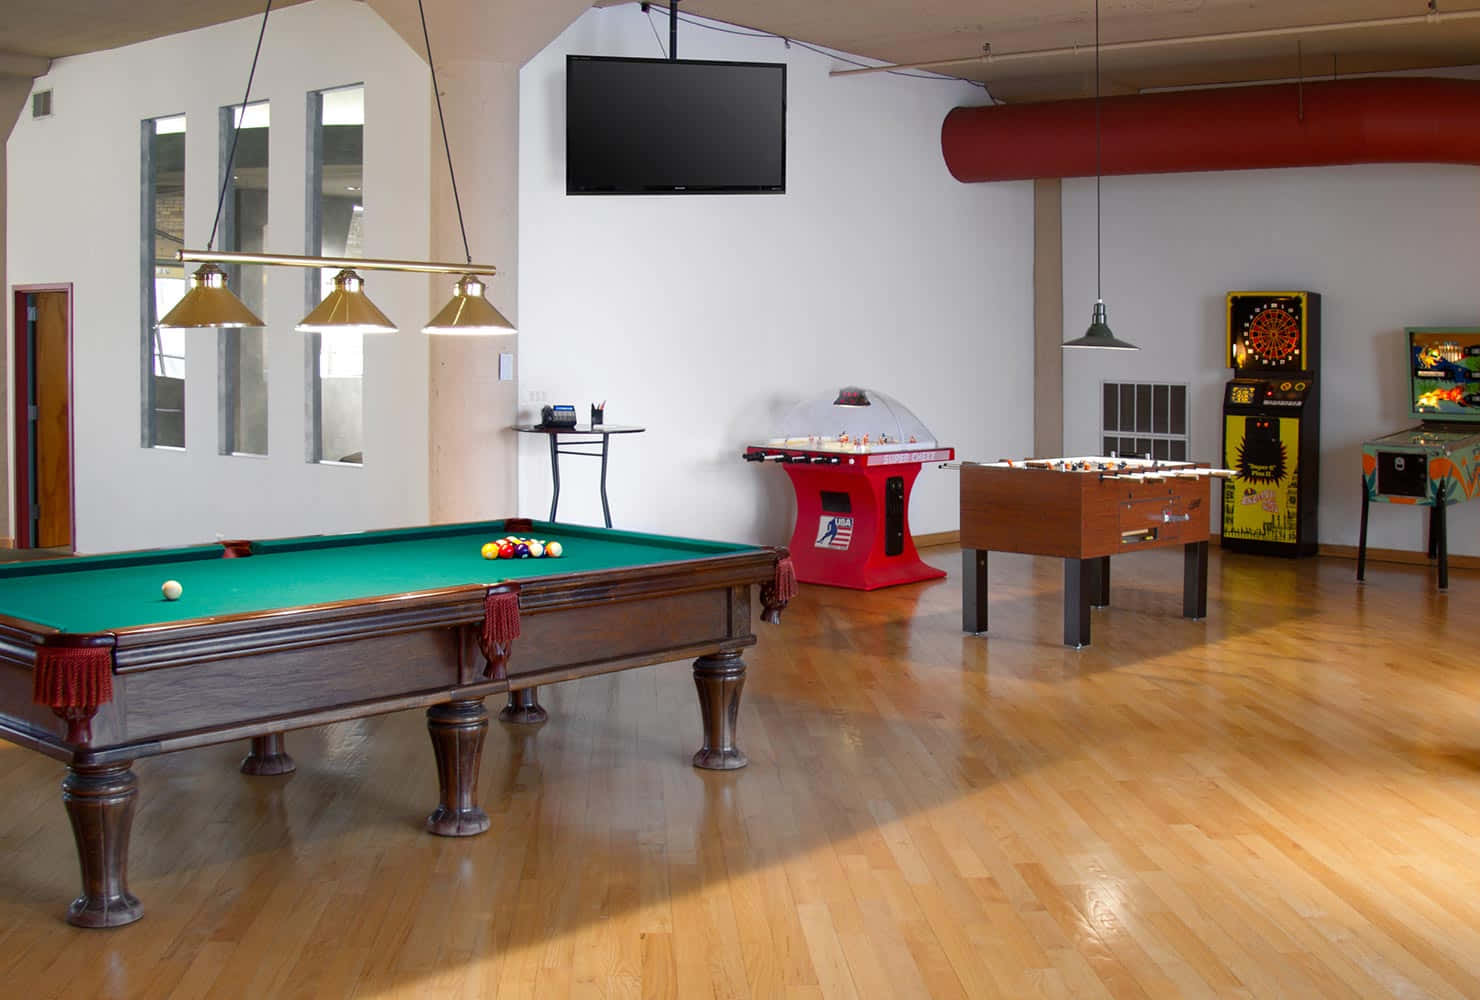 A Room With A Pool Table And Other Games